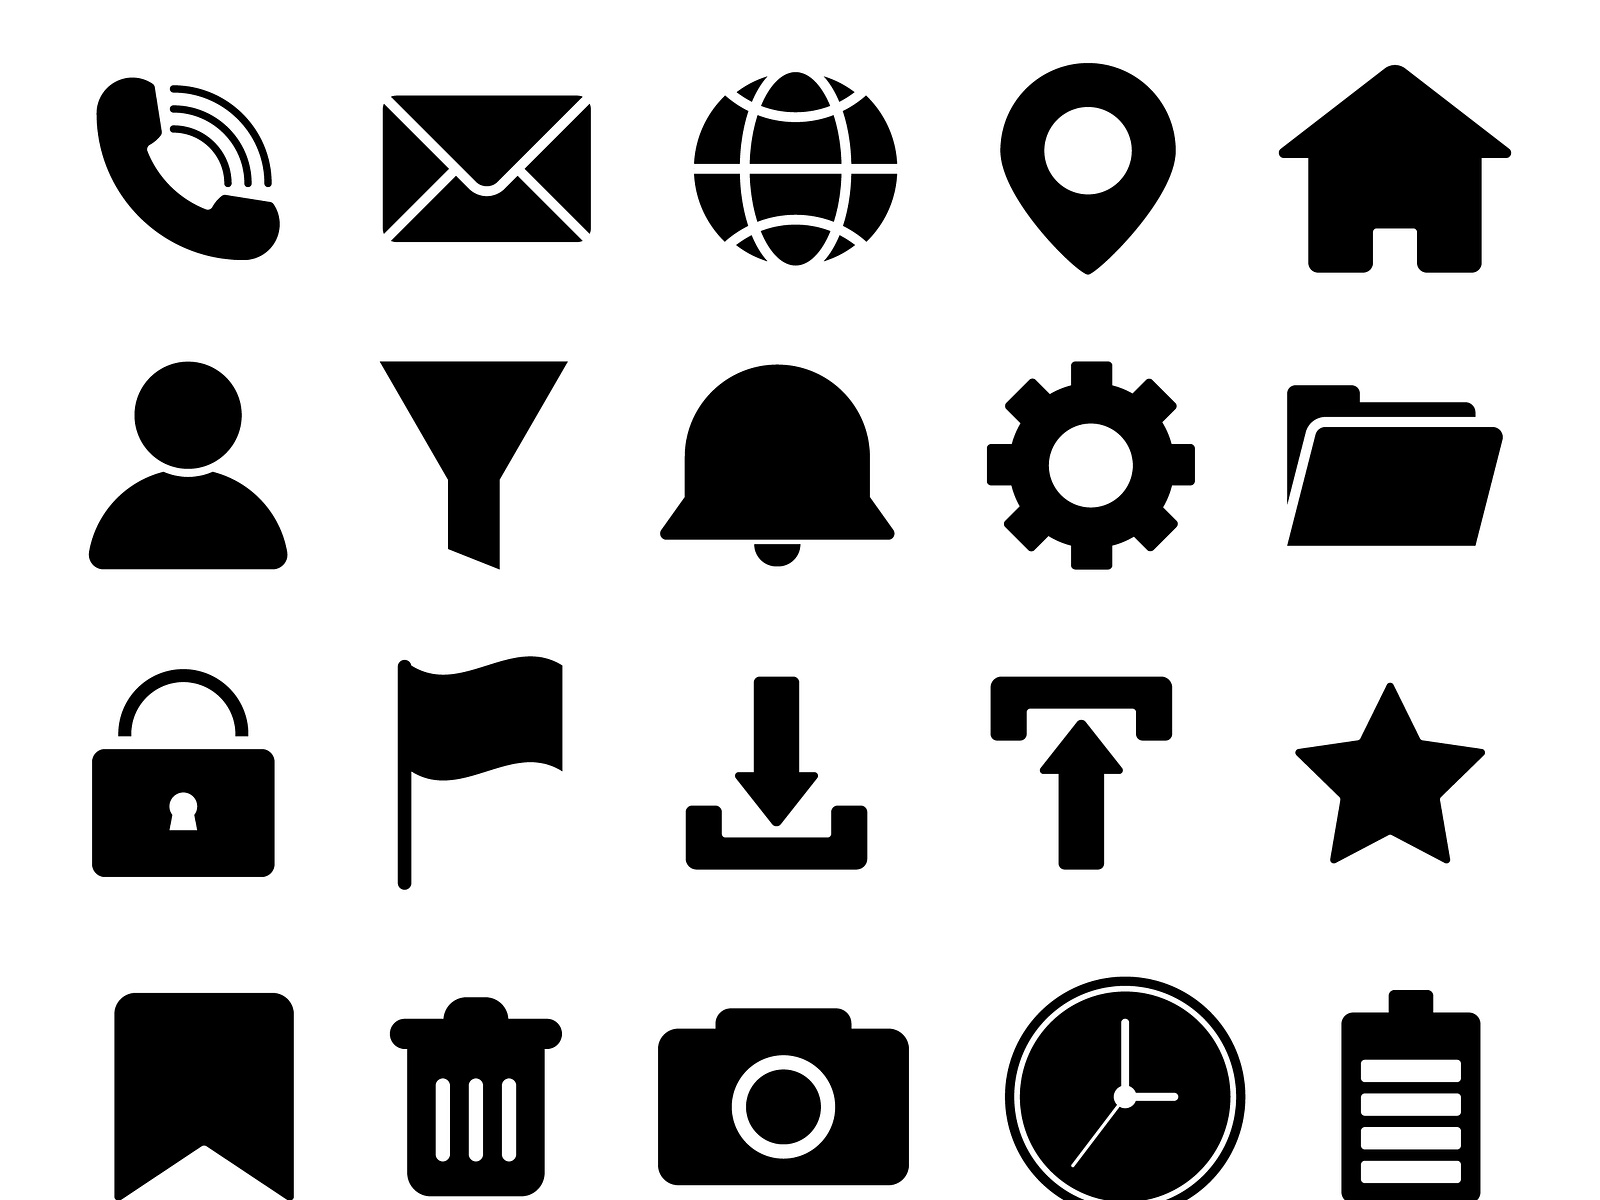 Contact Us Icon Set Vector Illustration by Mst Anzuara Begum on Dribbble